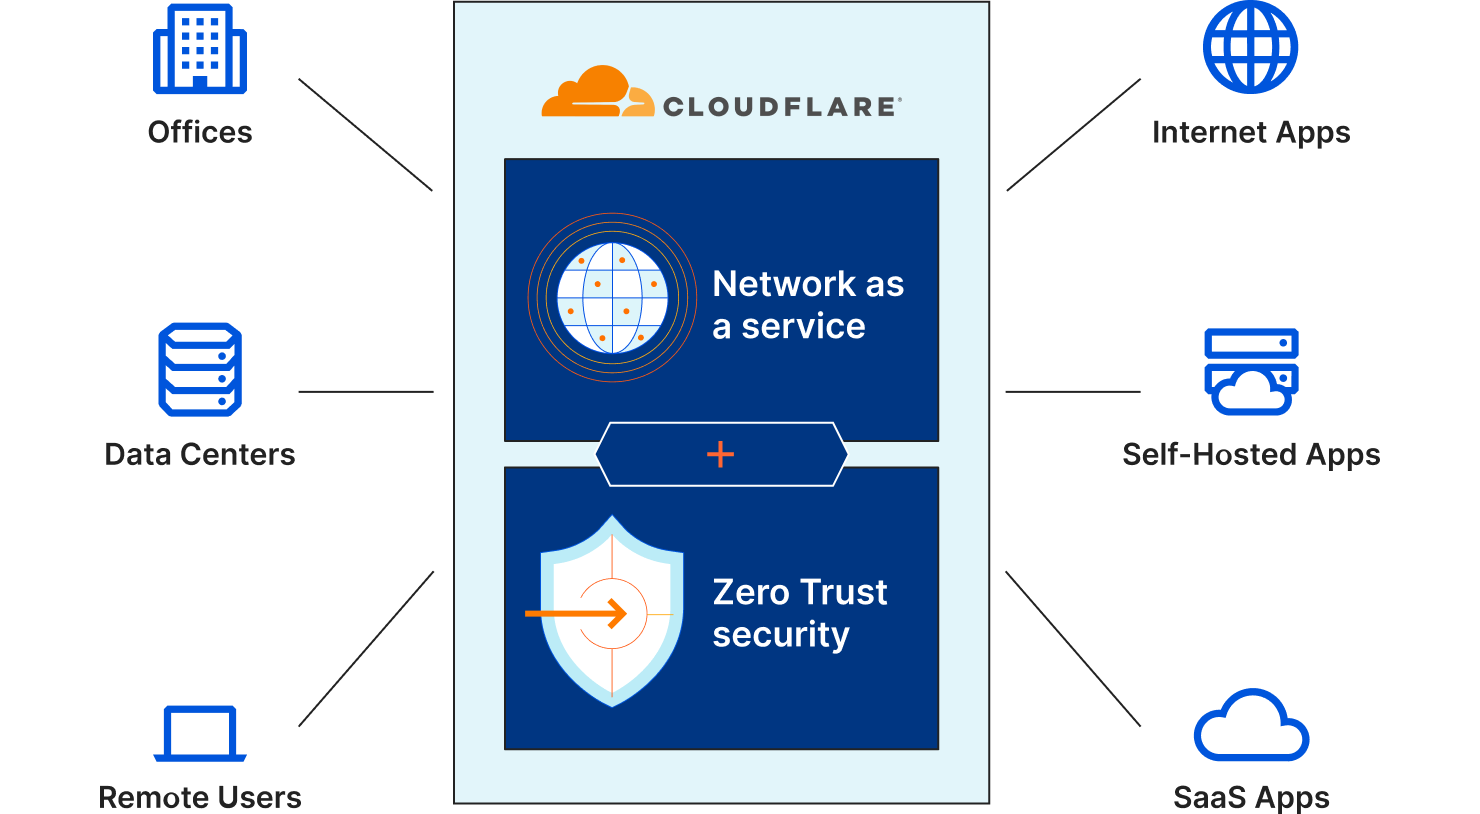 Cloudflare One: Make the Internet secure, fast, and reliable for your business